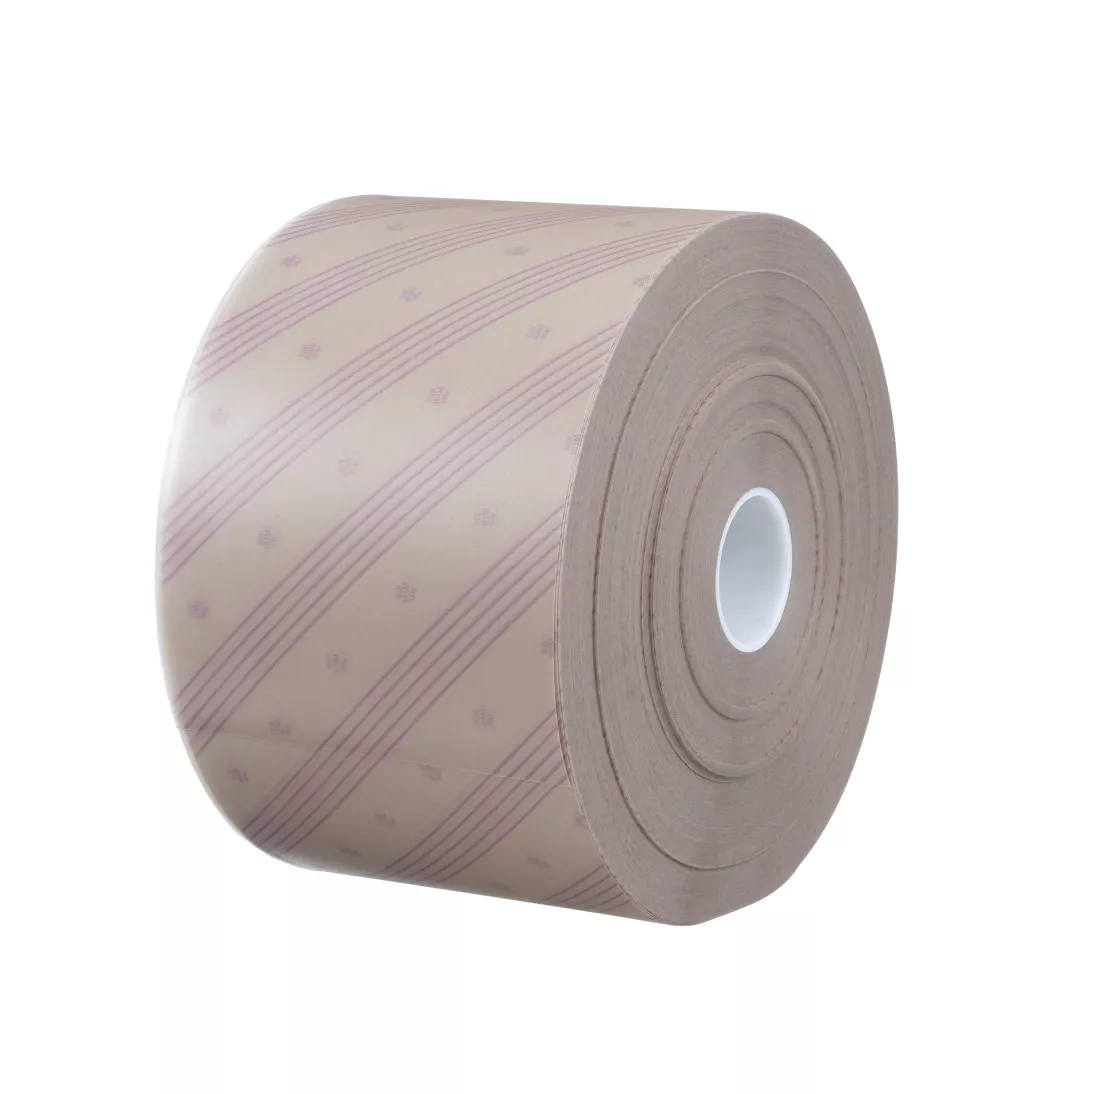 3M™ Optical Film Roll 361M, 6-3/4 in x 1476 ft x 3 in, 35 Mic, ASO, 1
ea/Case, Restricted